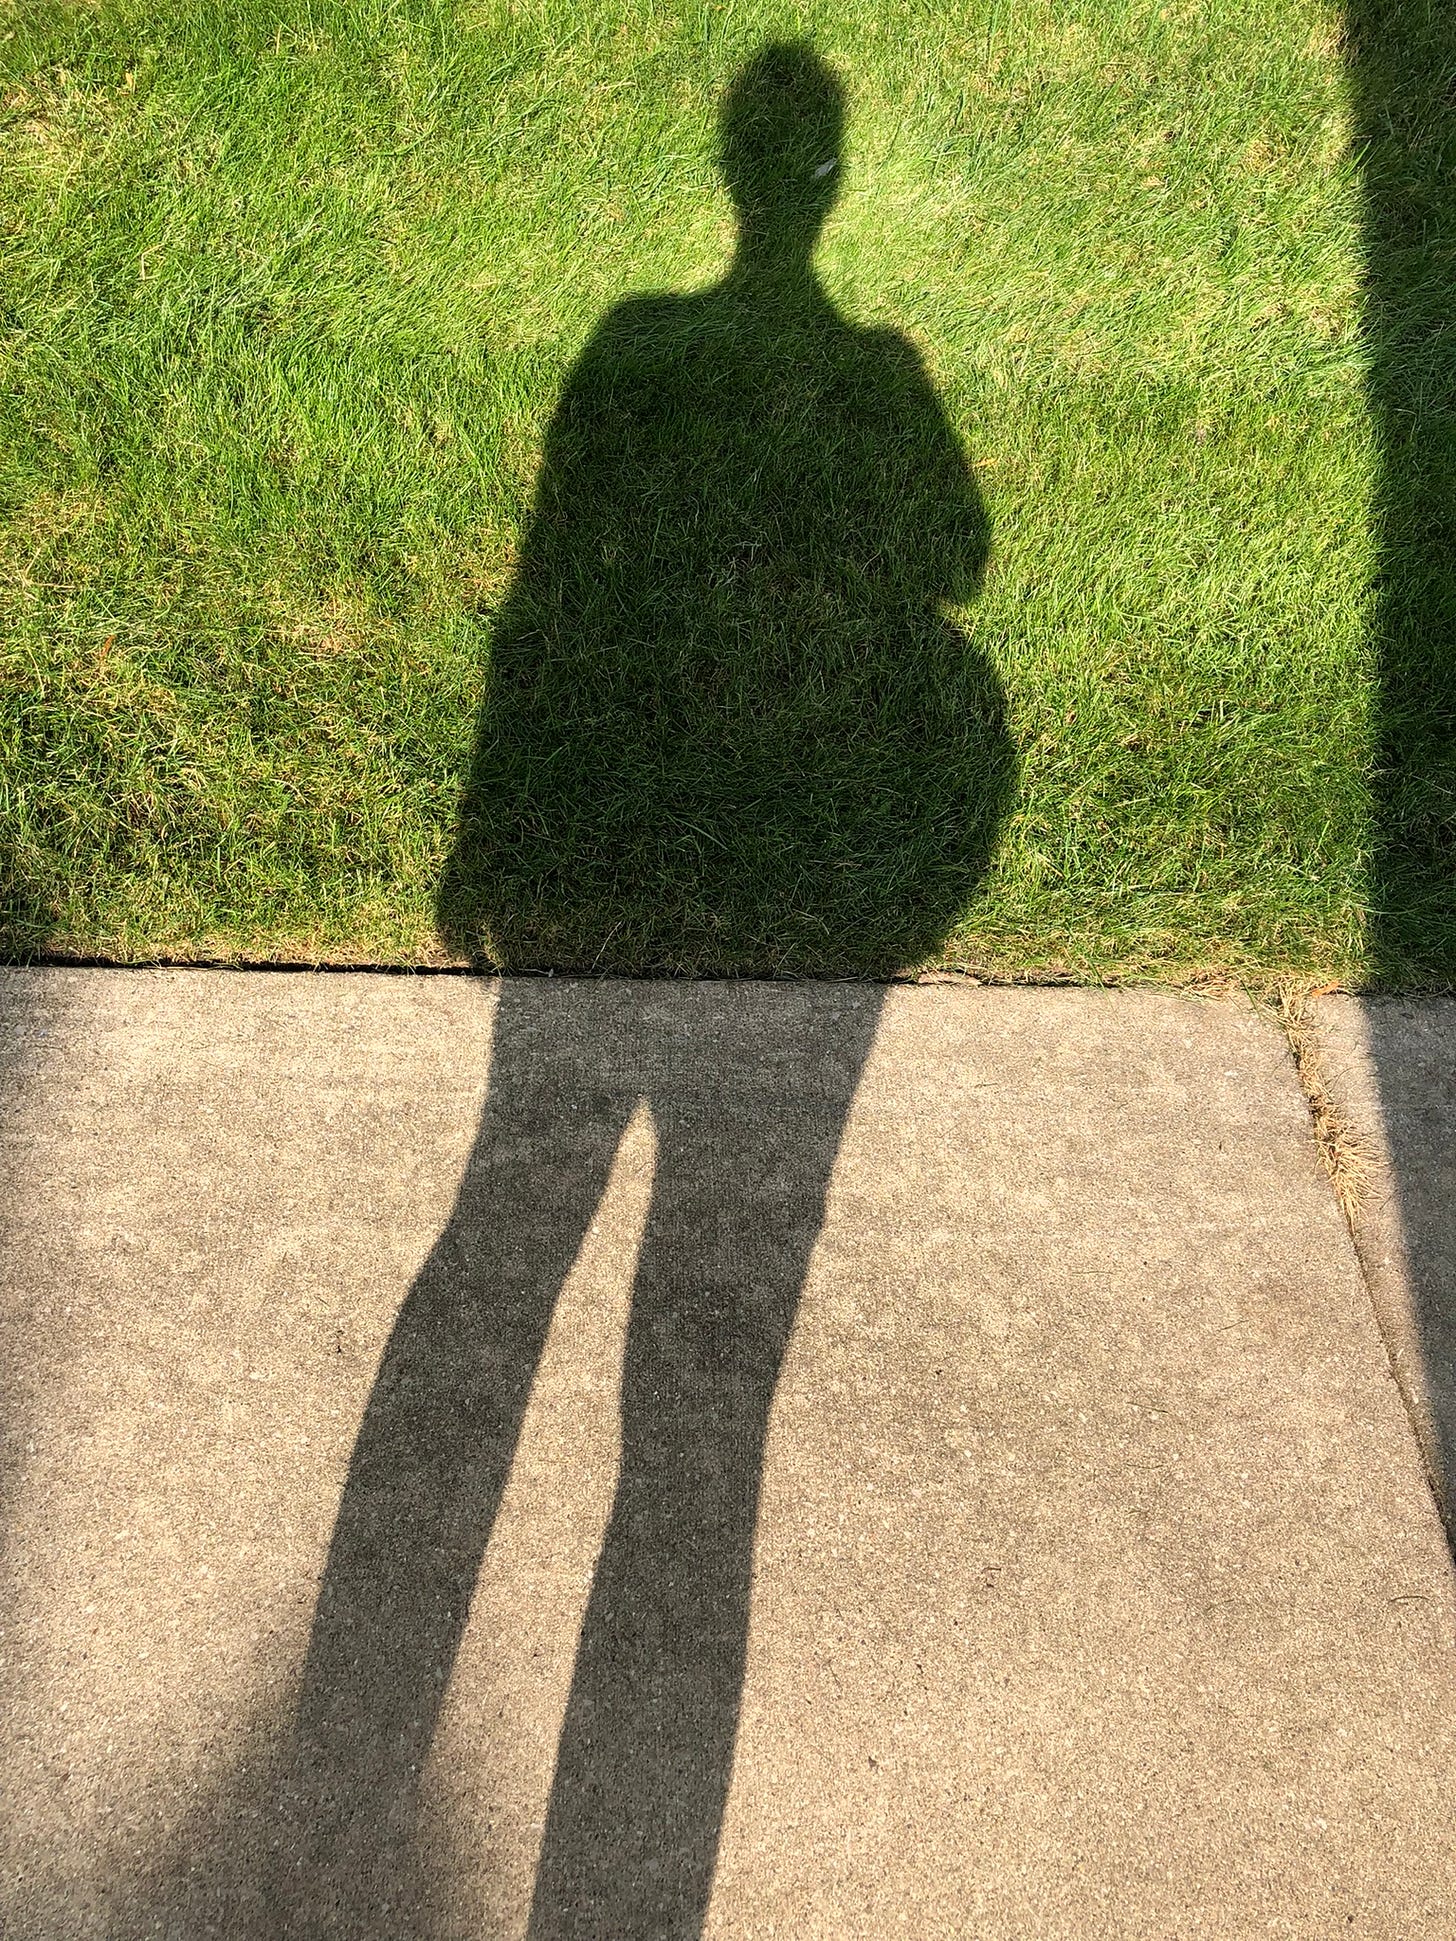 the shadow of a person cast half on grass and half on sidewalk